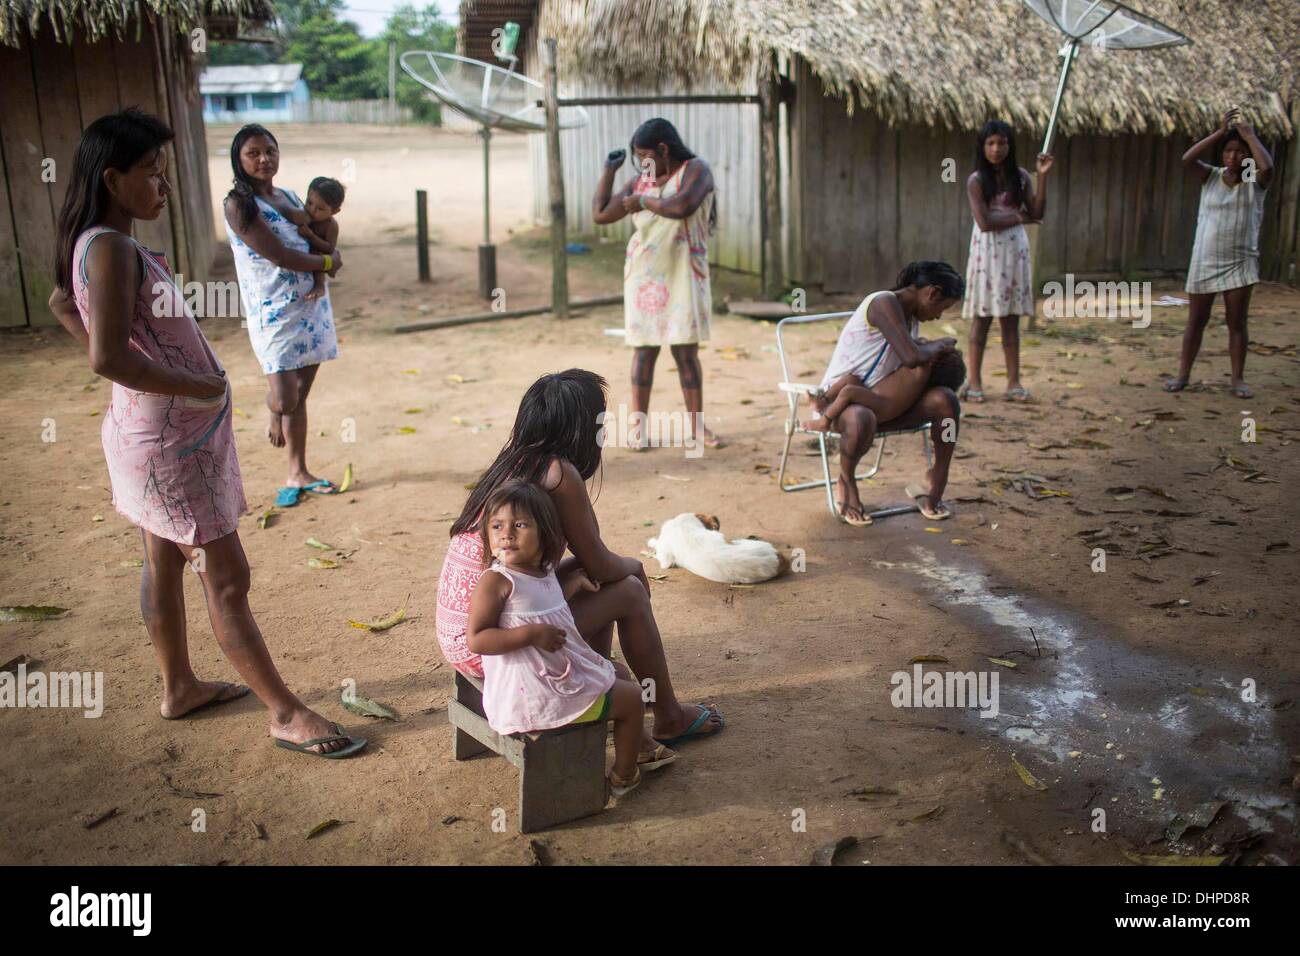 May 6, 2013 - Poti-Kro, Para, Brazil - The Xikrin have distinct gender roles-while the men spend the day hunting and fishing, women often stay in the village to care for the home and the family. The indigenous Xikrin people live on the Bacaja, a tributary of the Xingu River, where construction of the Belo Monte Dam is reaching peak construction. Some scientists warn that the water level of the Bacaja will decrease precipitously due to the dam. (Credit Image: © Taylor Weidman/ZUMA Wire/ZUMAPRESS.com) Stock Photo